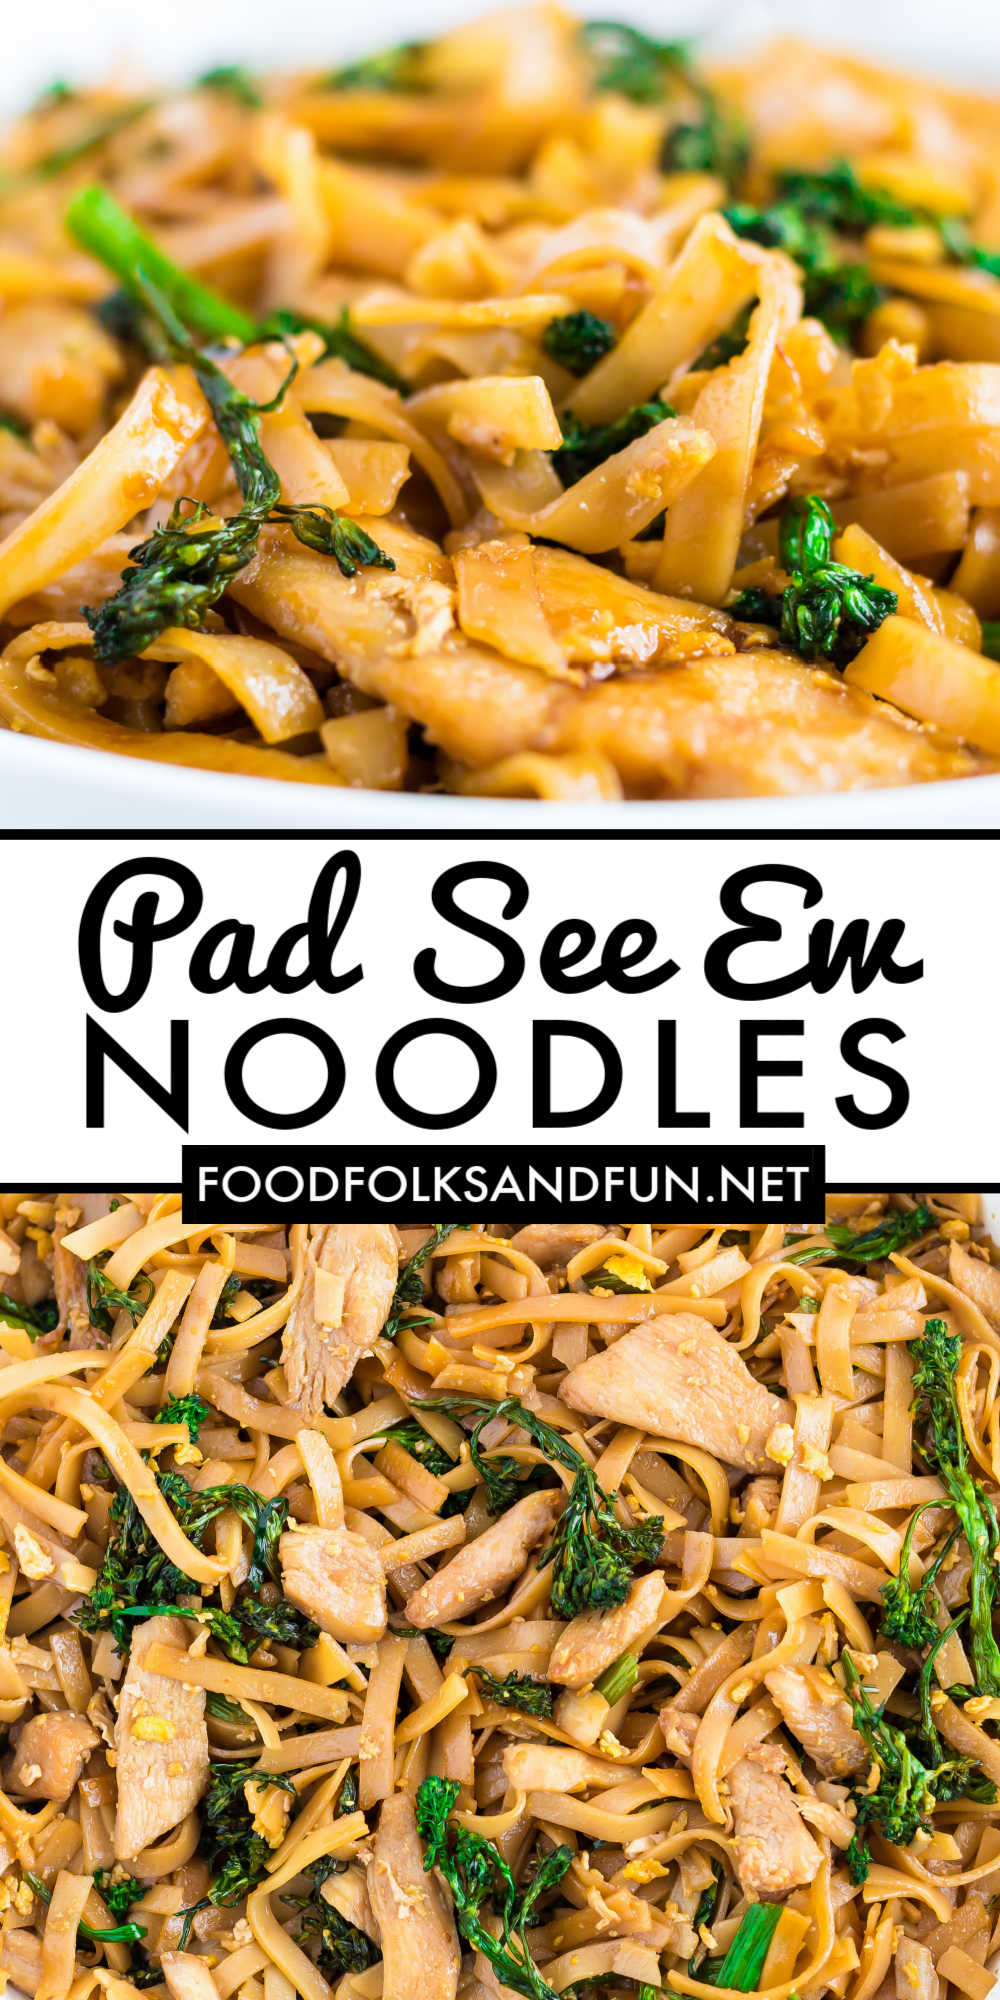 Pad See Ew Noodles is made with Thai rice noodles with chicken, Chinese broccoli, and a sweet and savory sauce. This homemade recipe rivals your favorite Thai restaurant!  via @foodfolksandfun